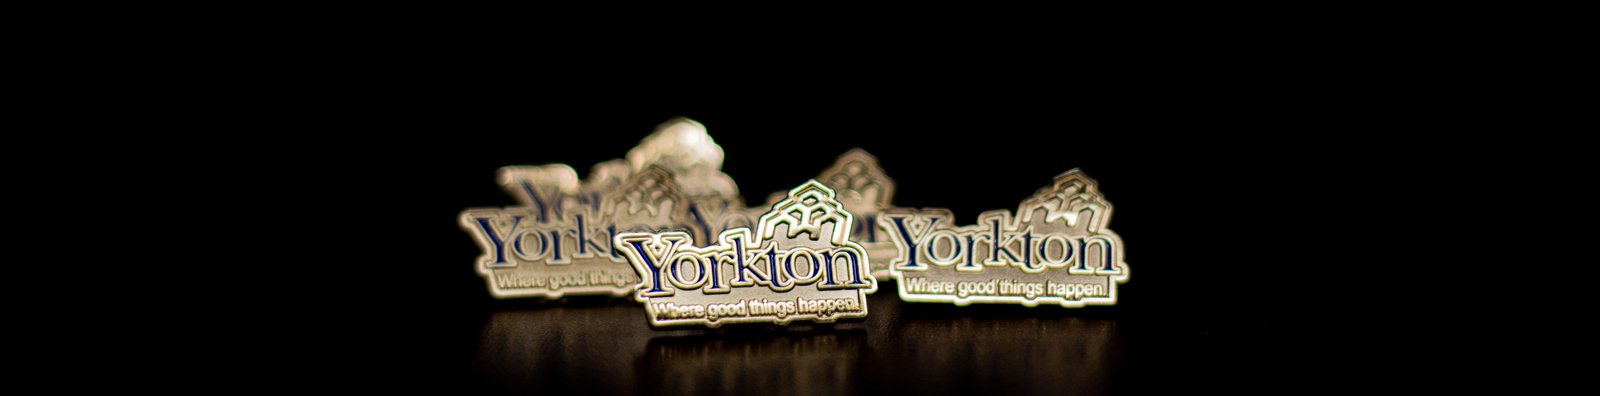 lapel pins for the City of Yorkton